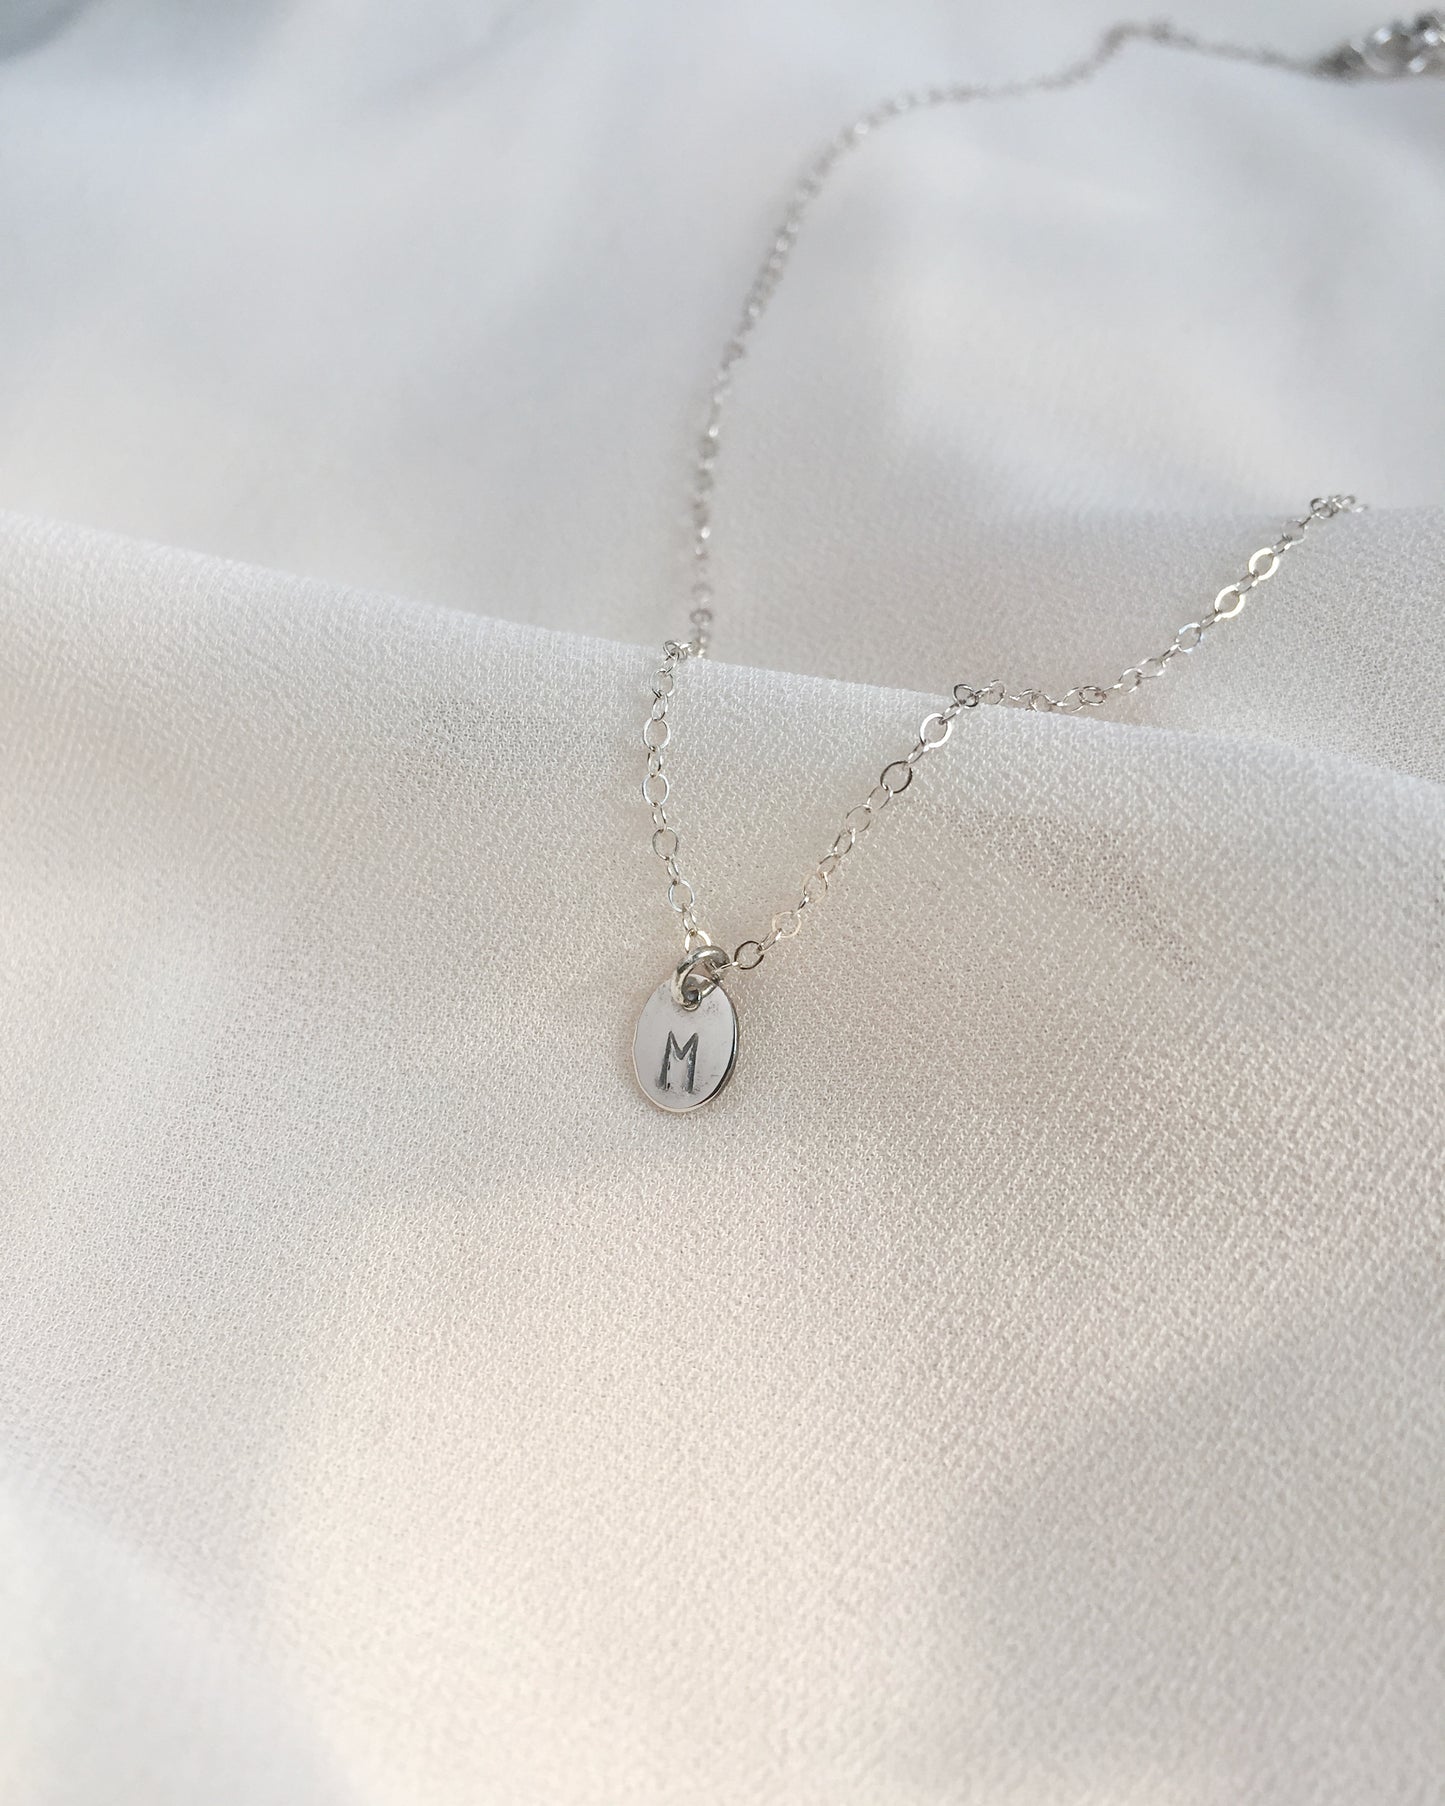 Mini Initial Necklace In Gold Filled or Sterling Silver | Tiny Initial Necklace | IB Jewelry